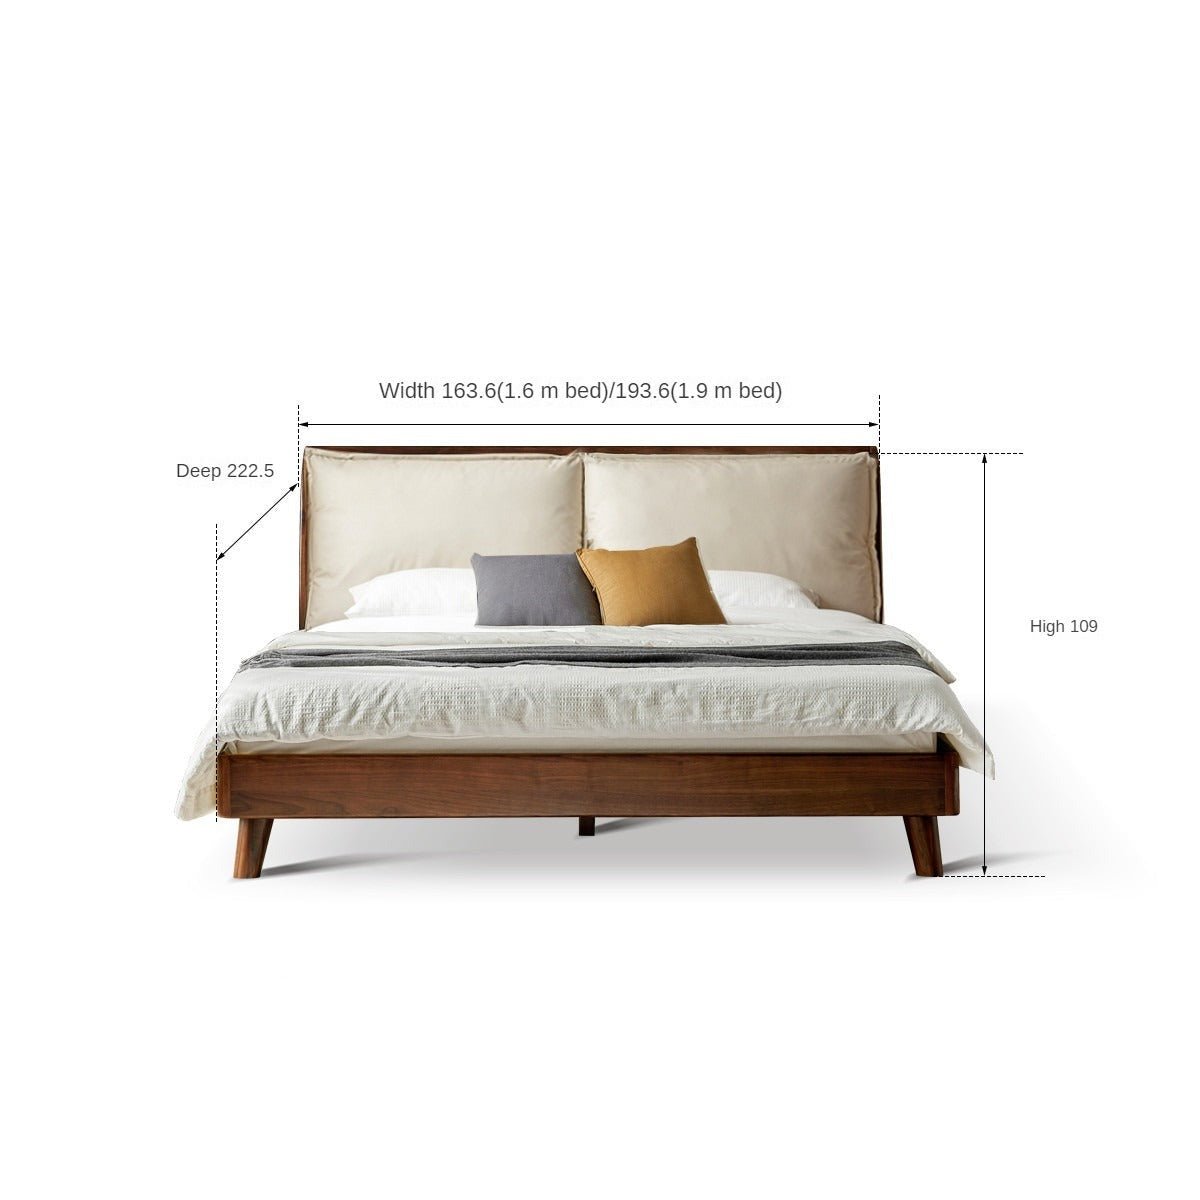 Black Walnut solid wood Bed Leather,Technology cloth "